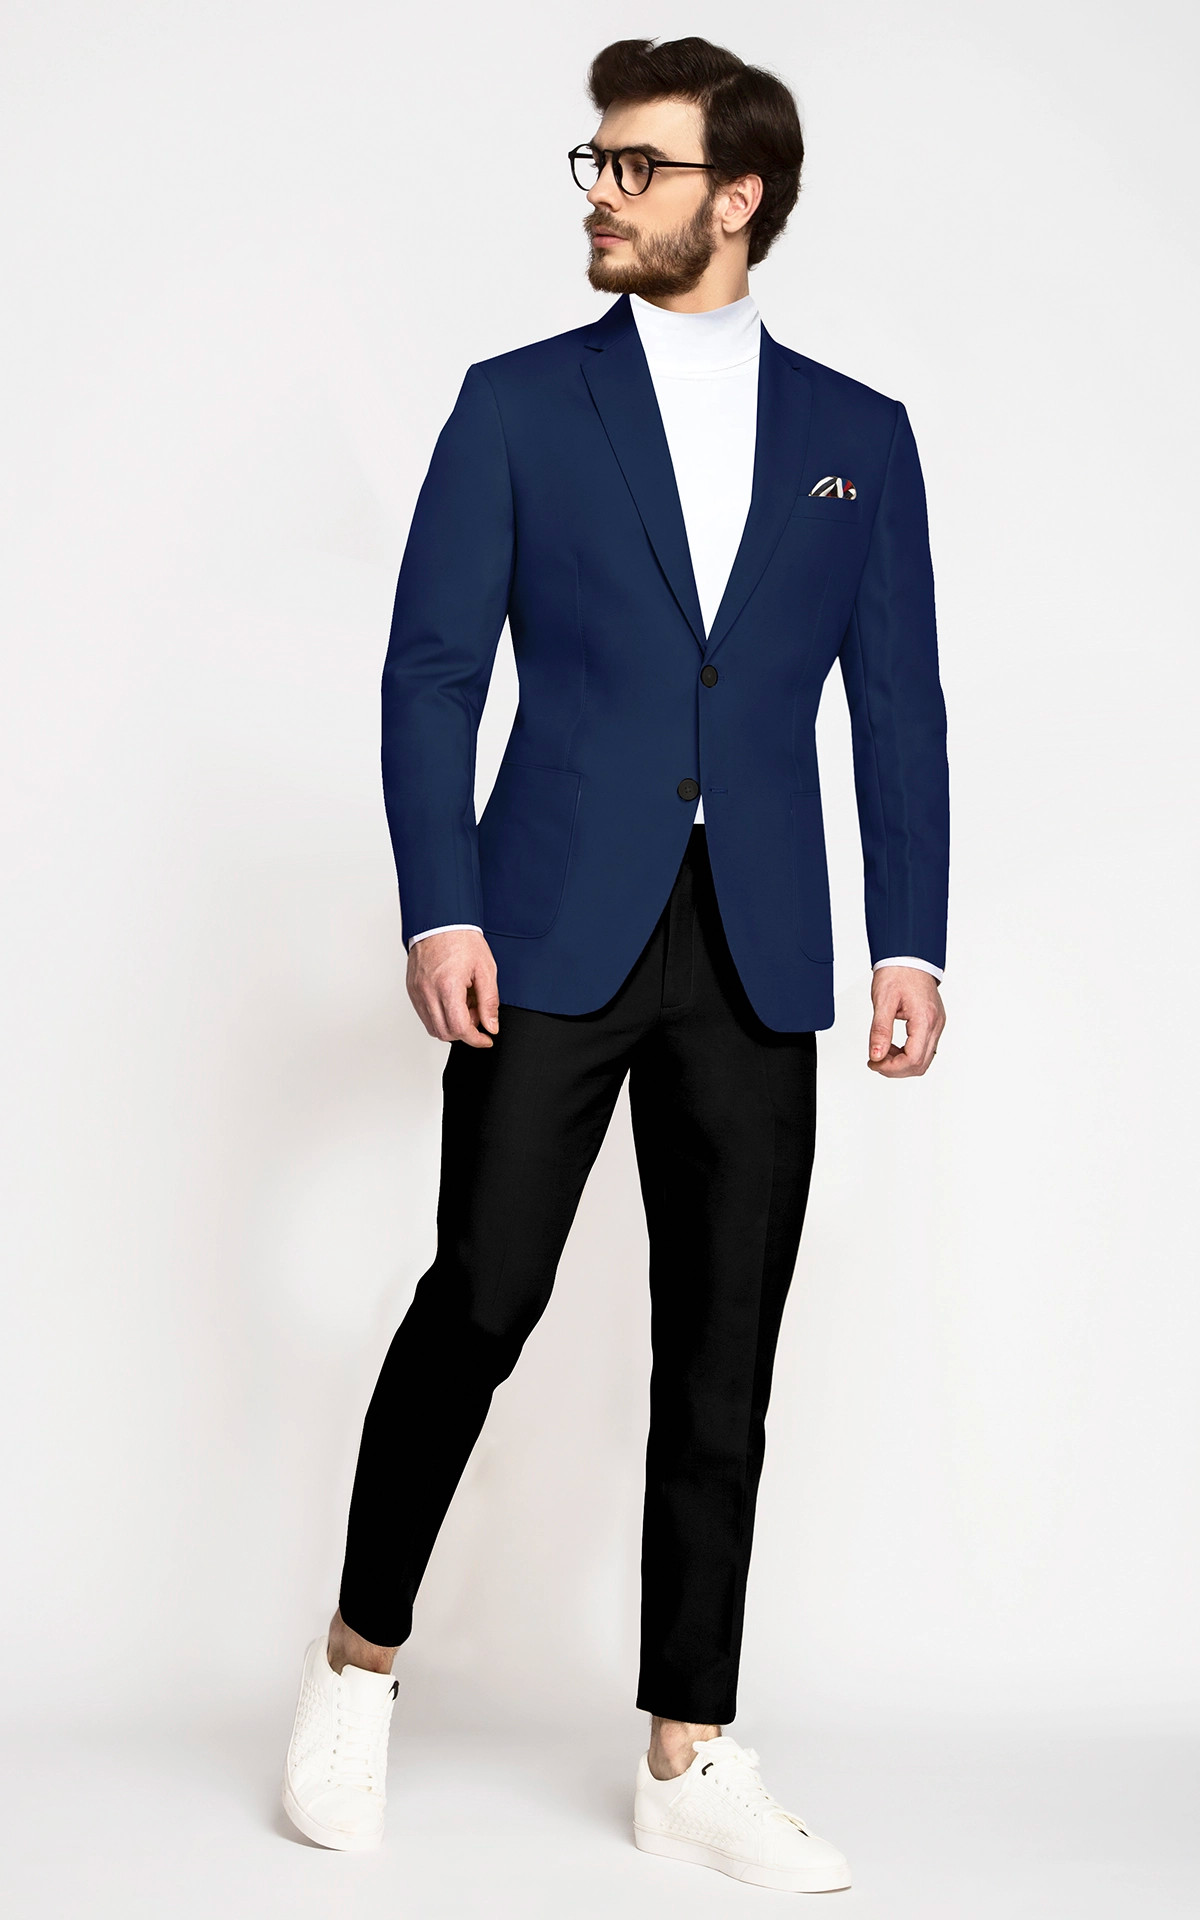 Blue Check Blazer with Blue Dress Pants Outfits For Men (32 ideas &  outfits) | Lookastic